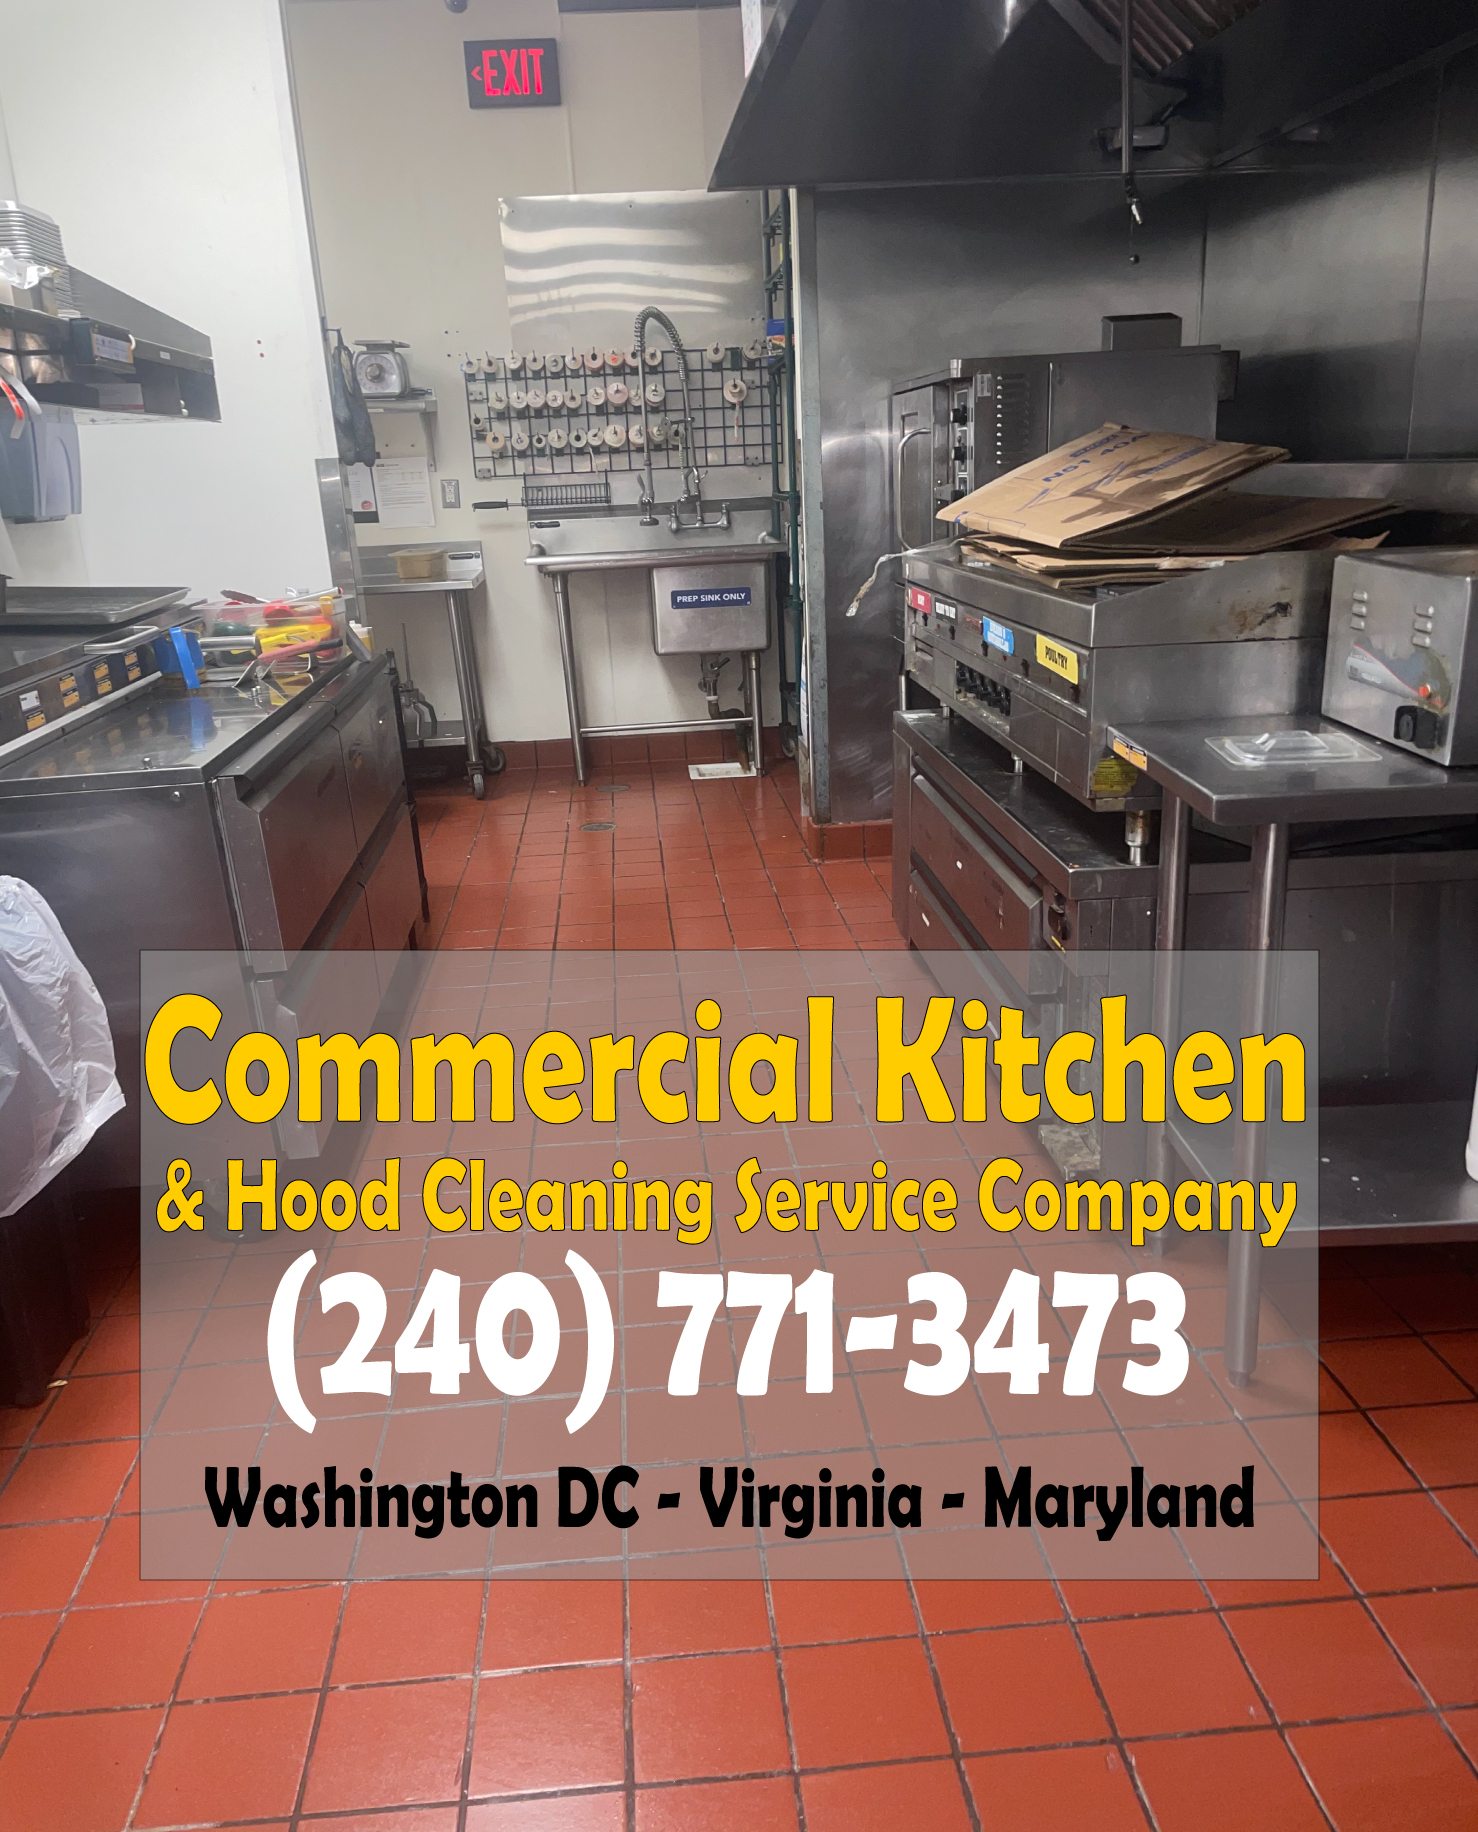 Commercial kitchen hood cleaning service near Maryland Virginia Washington DC